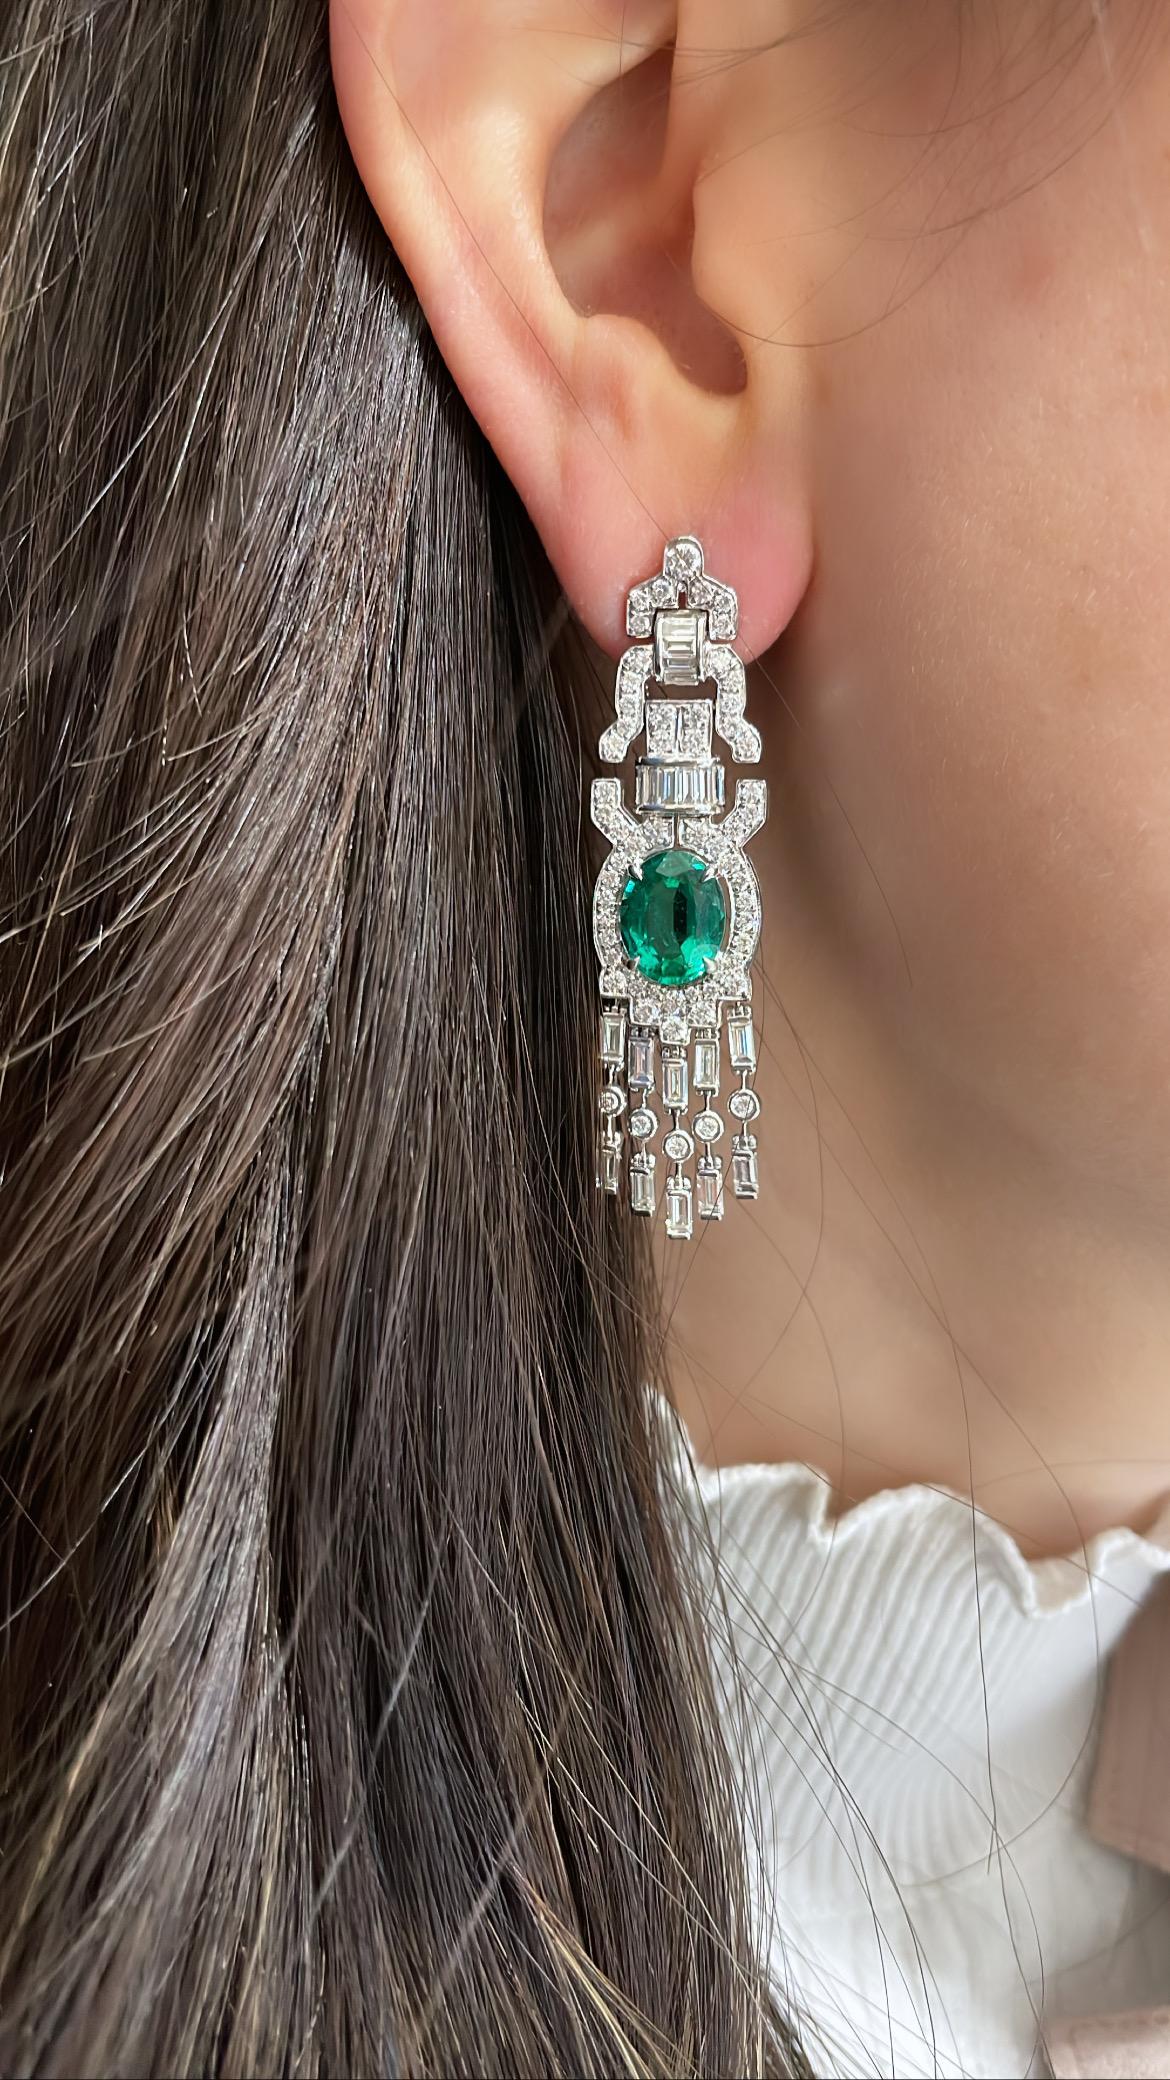 Art Deco Style Emerald and Diamond Drop Earrings 9 Carat
These elegant art-deco style earrings stand out with beautiful oval green emerald stones at the center totaling in 5.01 carats. Stunning round and diamond baguettes totaling 4 carats encrust